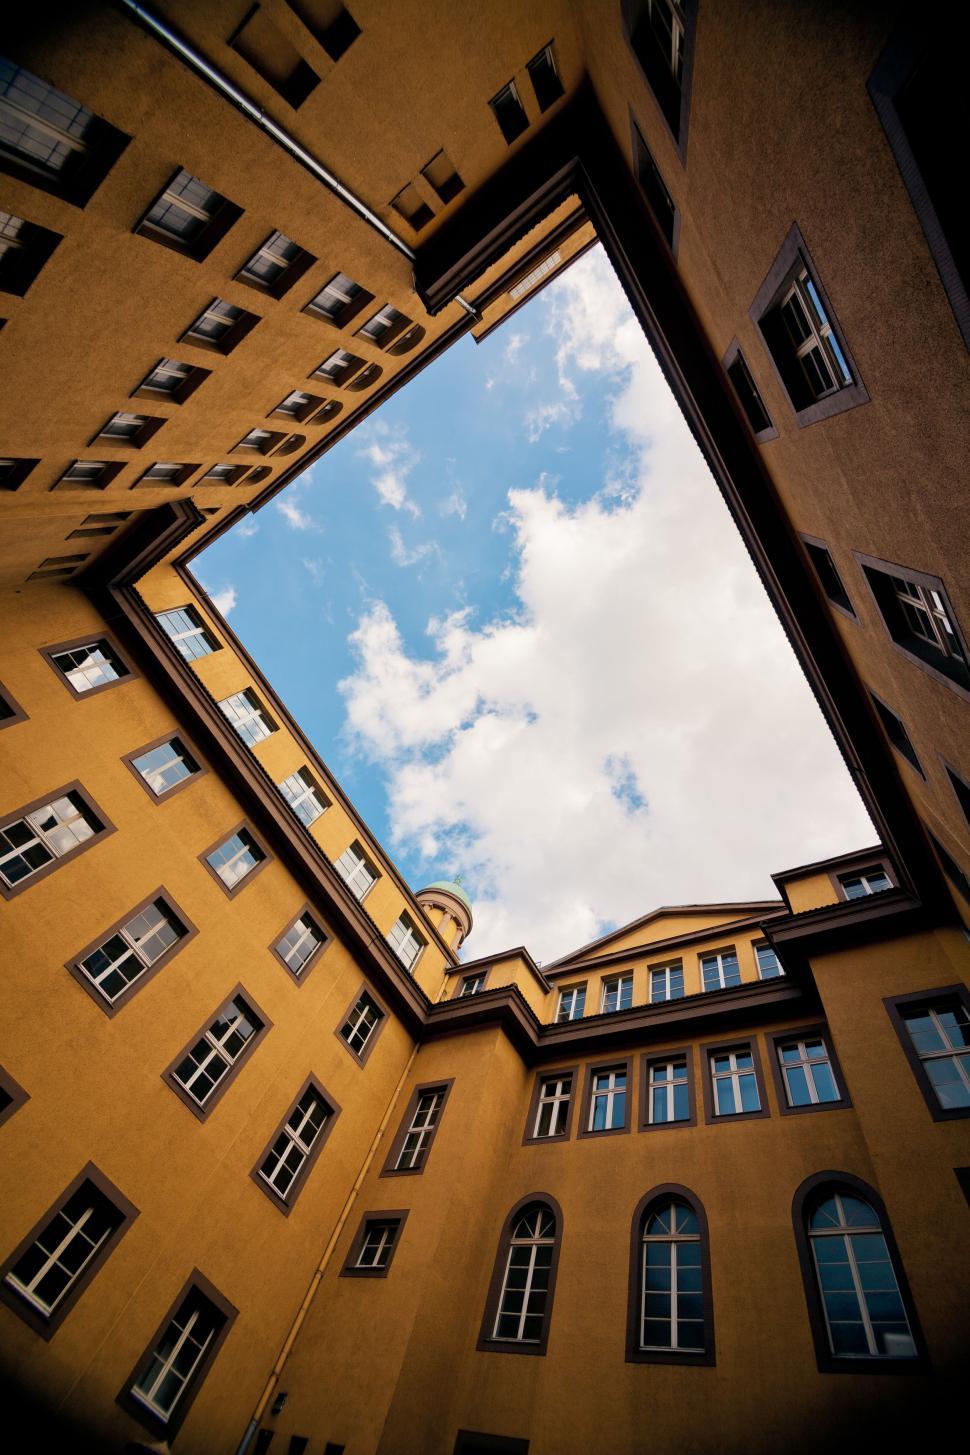 Free Image of Sky Reflection in Building Windows 